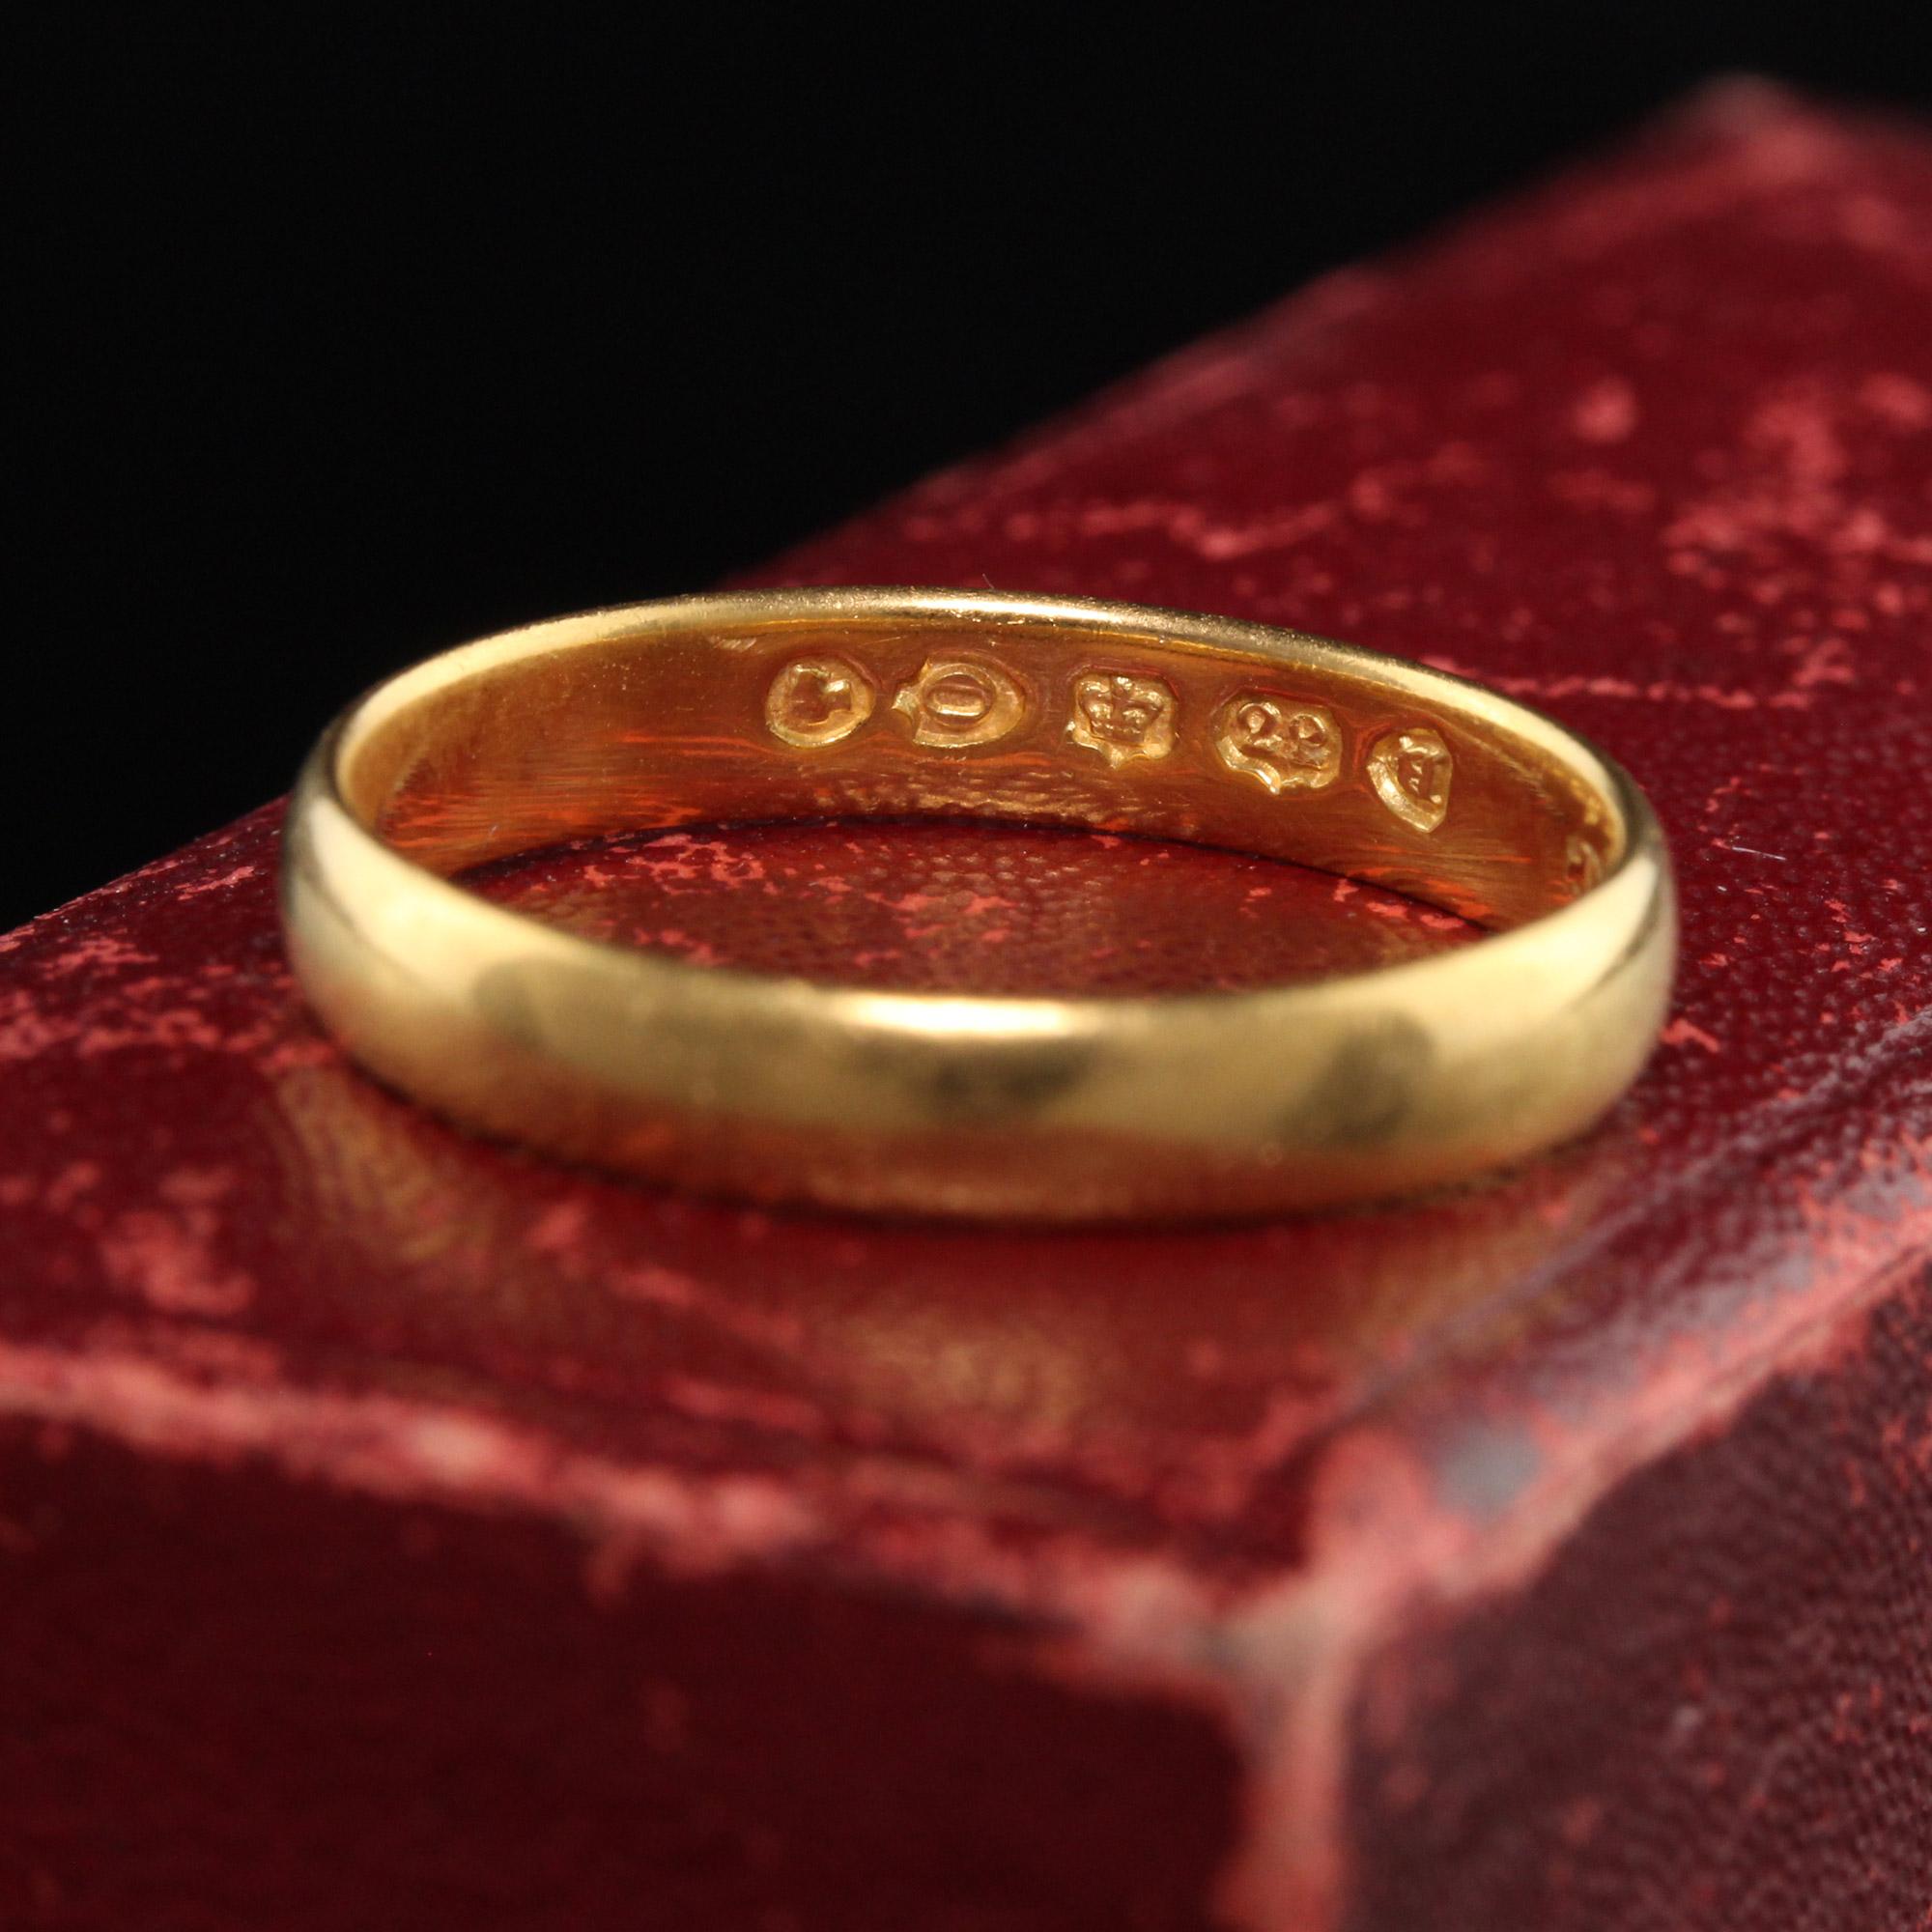 Beautiful Antique Victorian English 22K Yellow Gold Classic Wedding Band. This classic wedding band is hallmarked and made in 22k yellow gold. It has a rich patina and color to it and in great condition.

Item #R1001

Metal: 22K Yellow Gold

Weight: